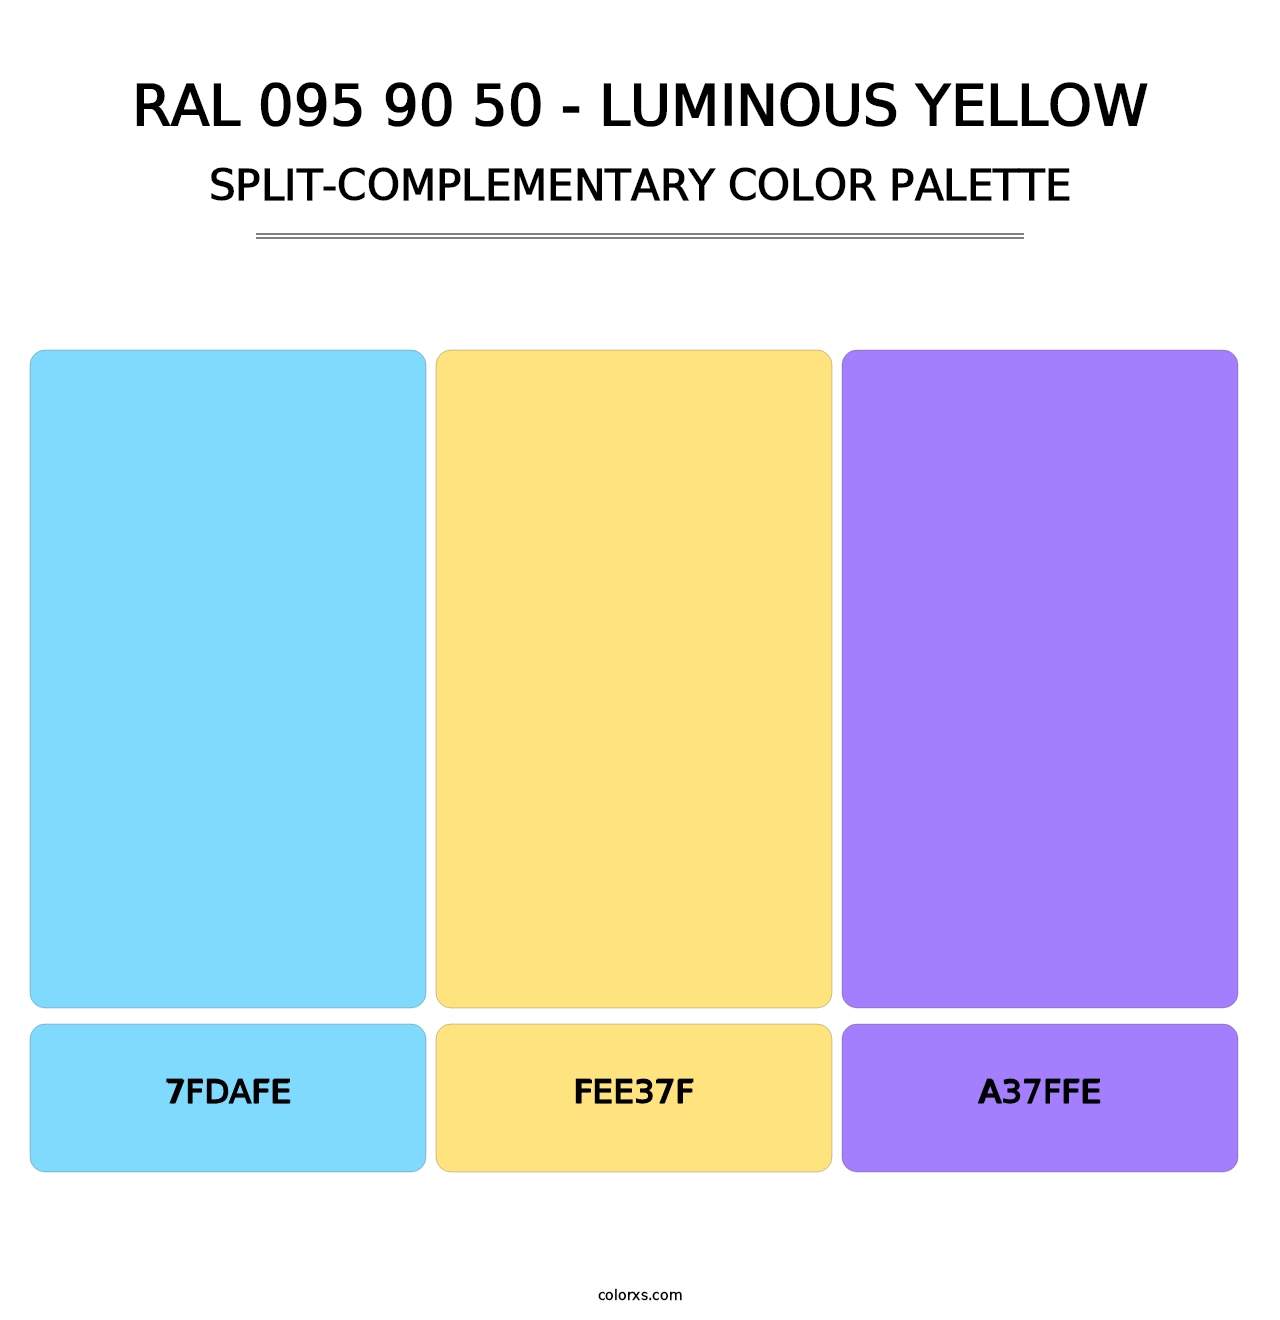 RAL 095 90 50 - Luminous Yellow - Split-Complementary Color Palette